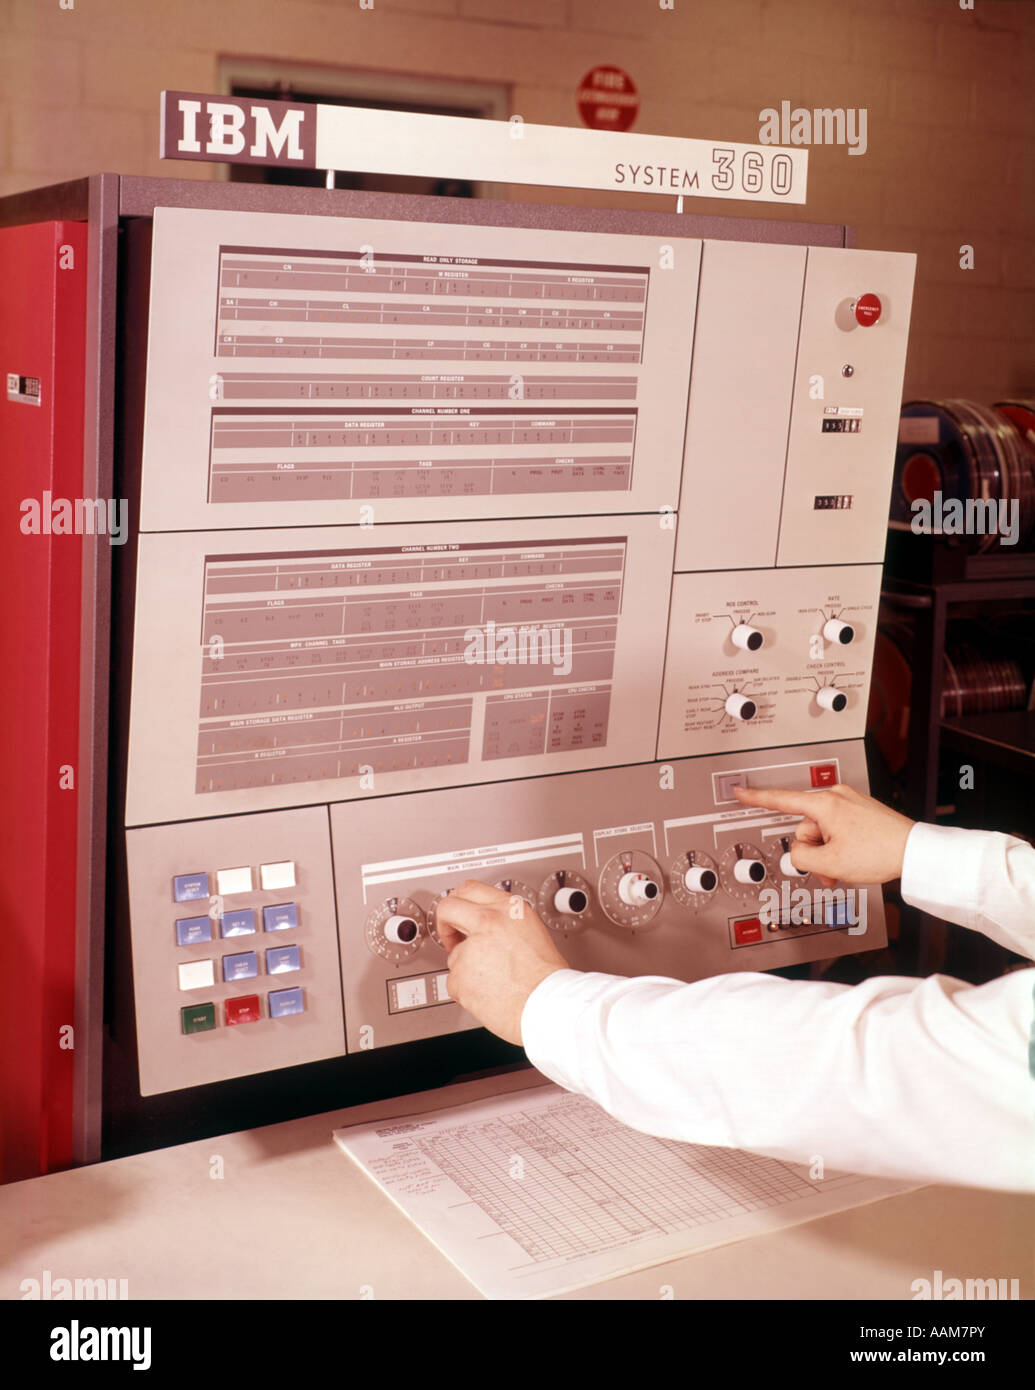 1960s IBM SYSTEM 360 COMPUTER DATA PROCESSING CONTROL PANEL HANDS Stock Photo